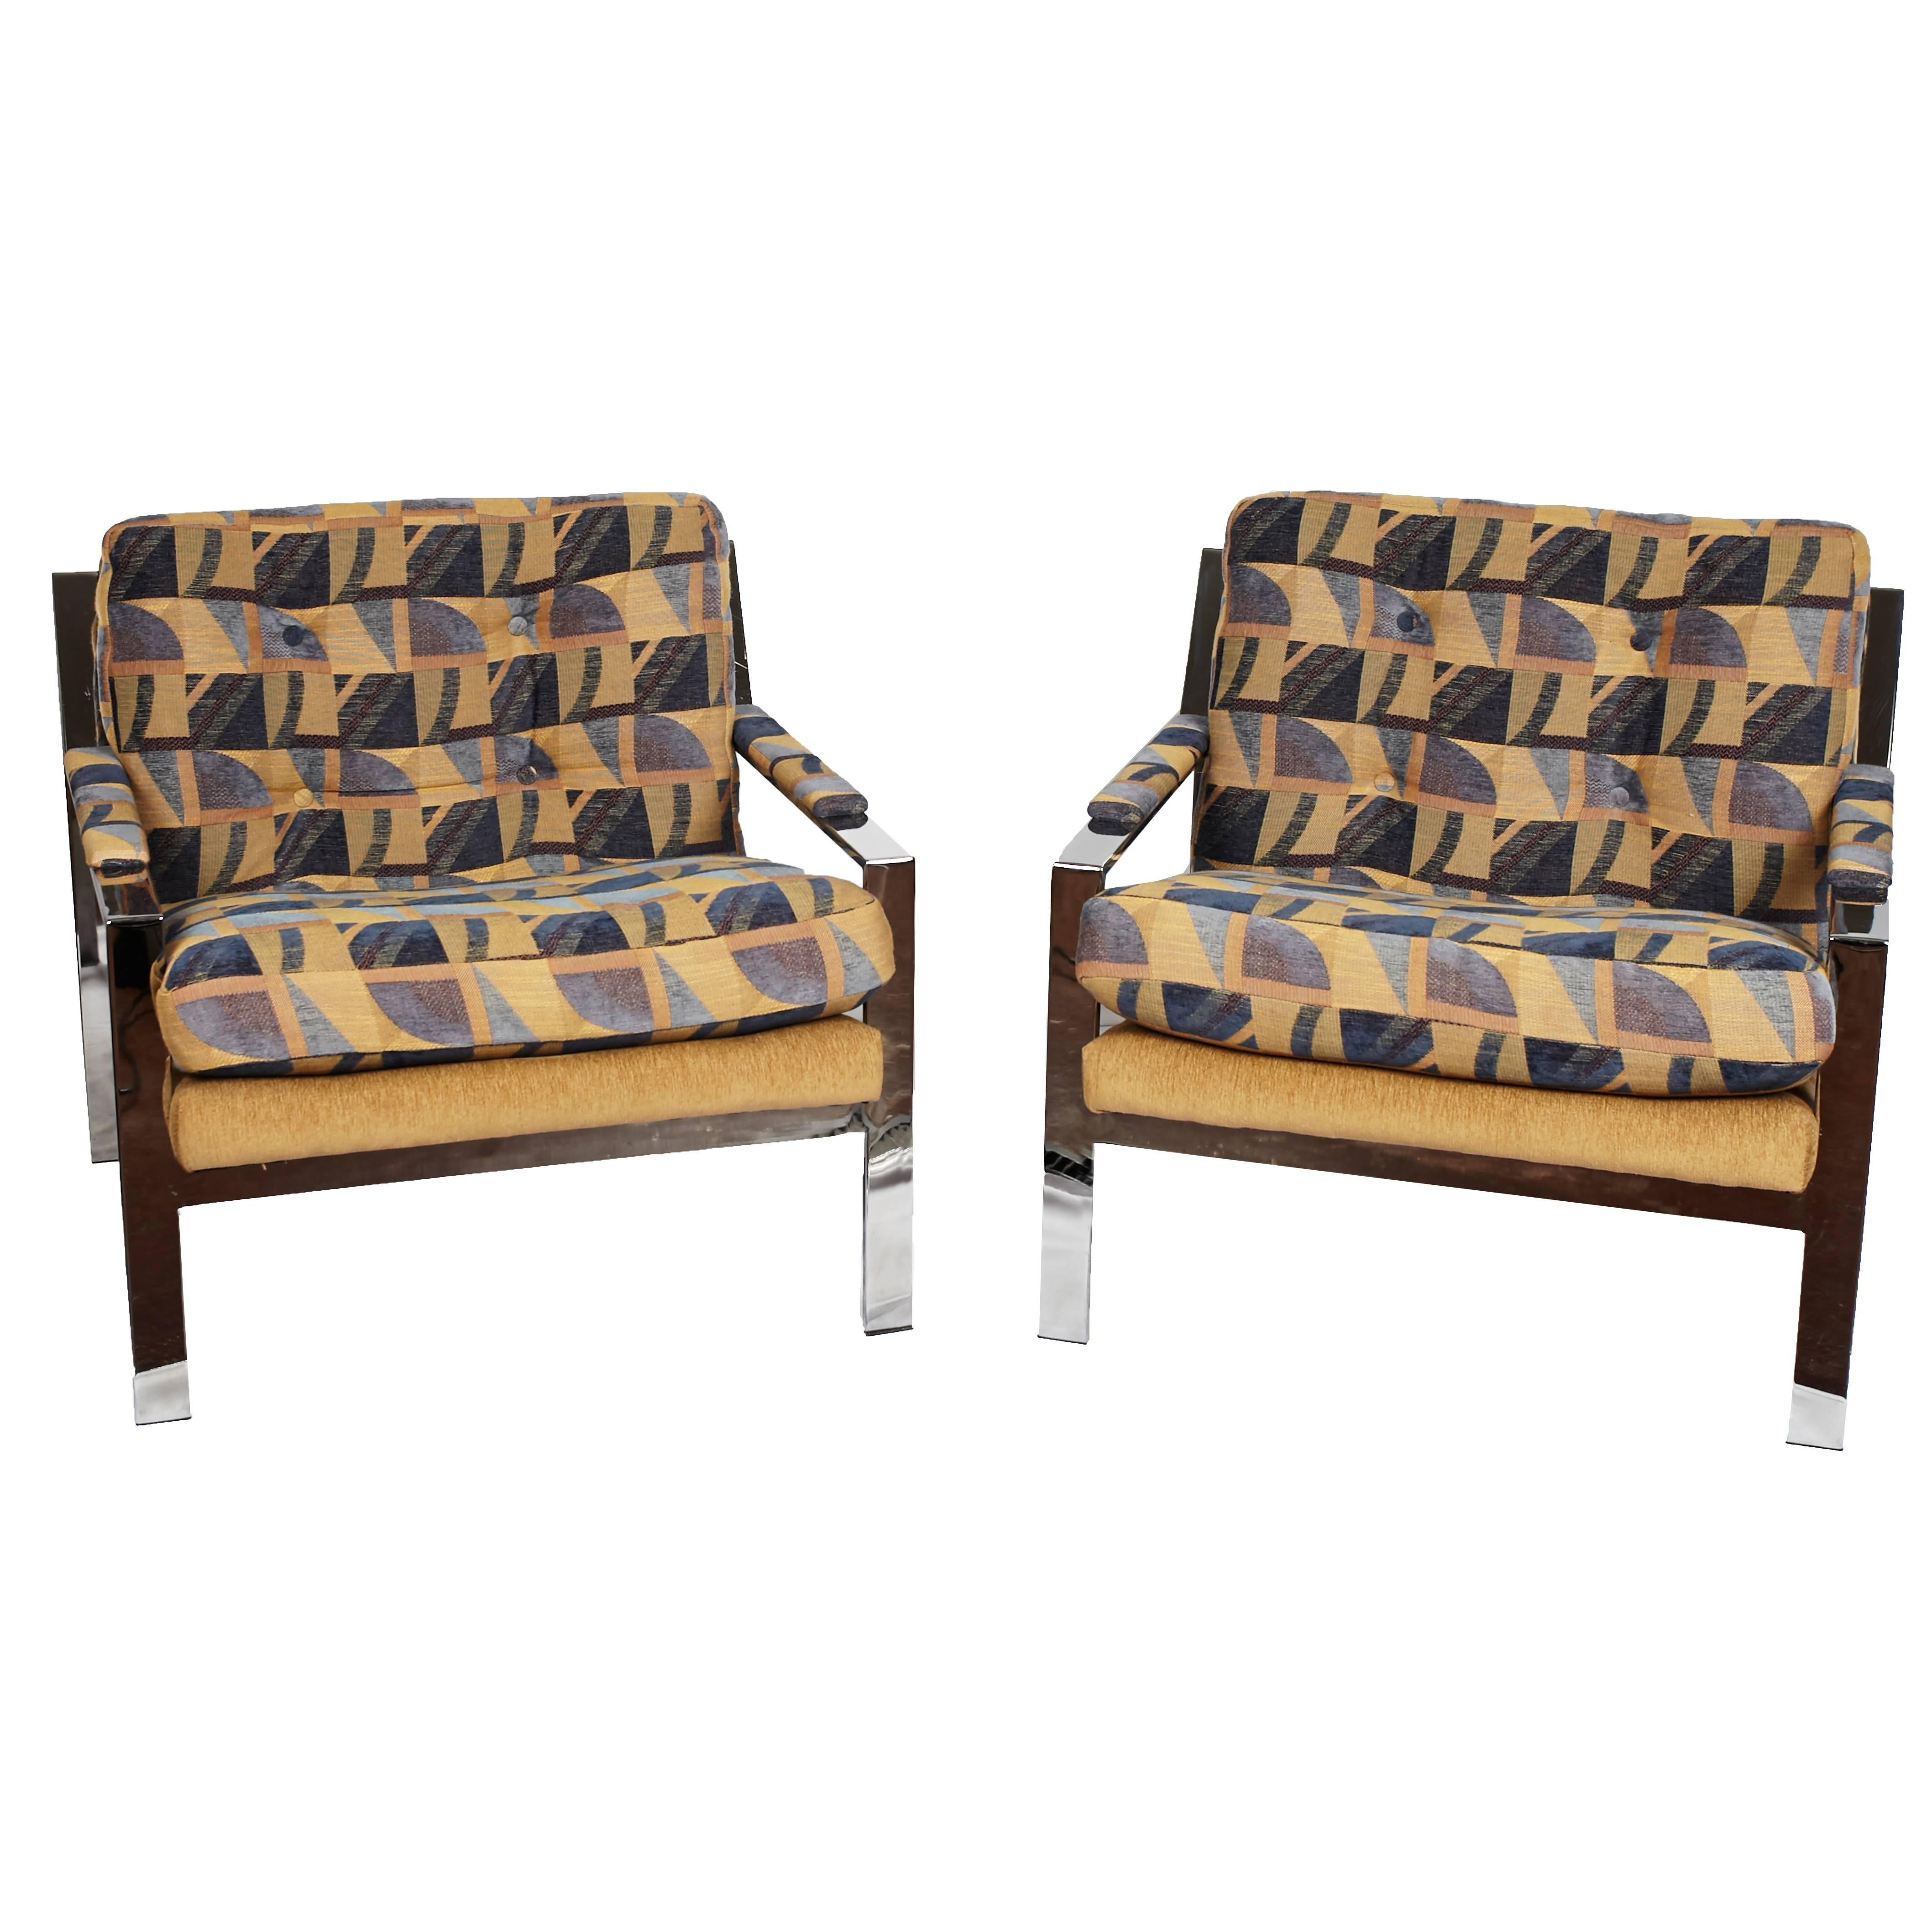 Pair of Cy Mann Lounge Chairs with Polished Chrome